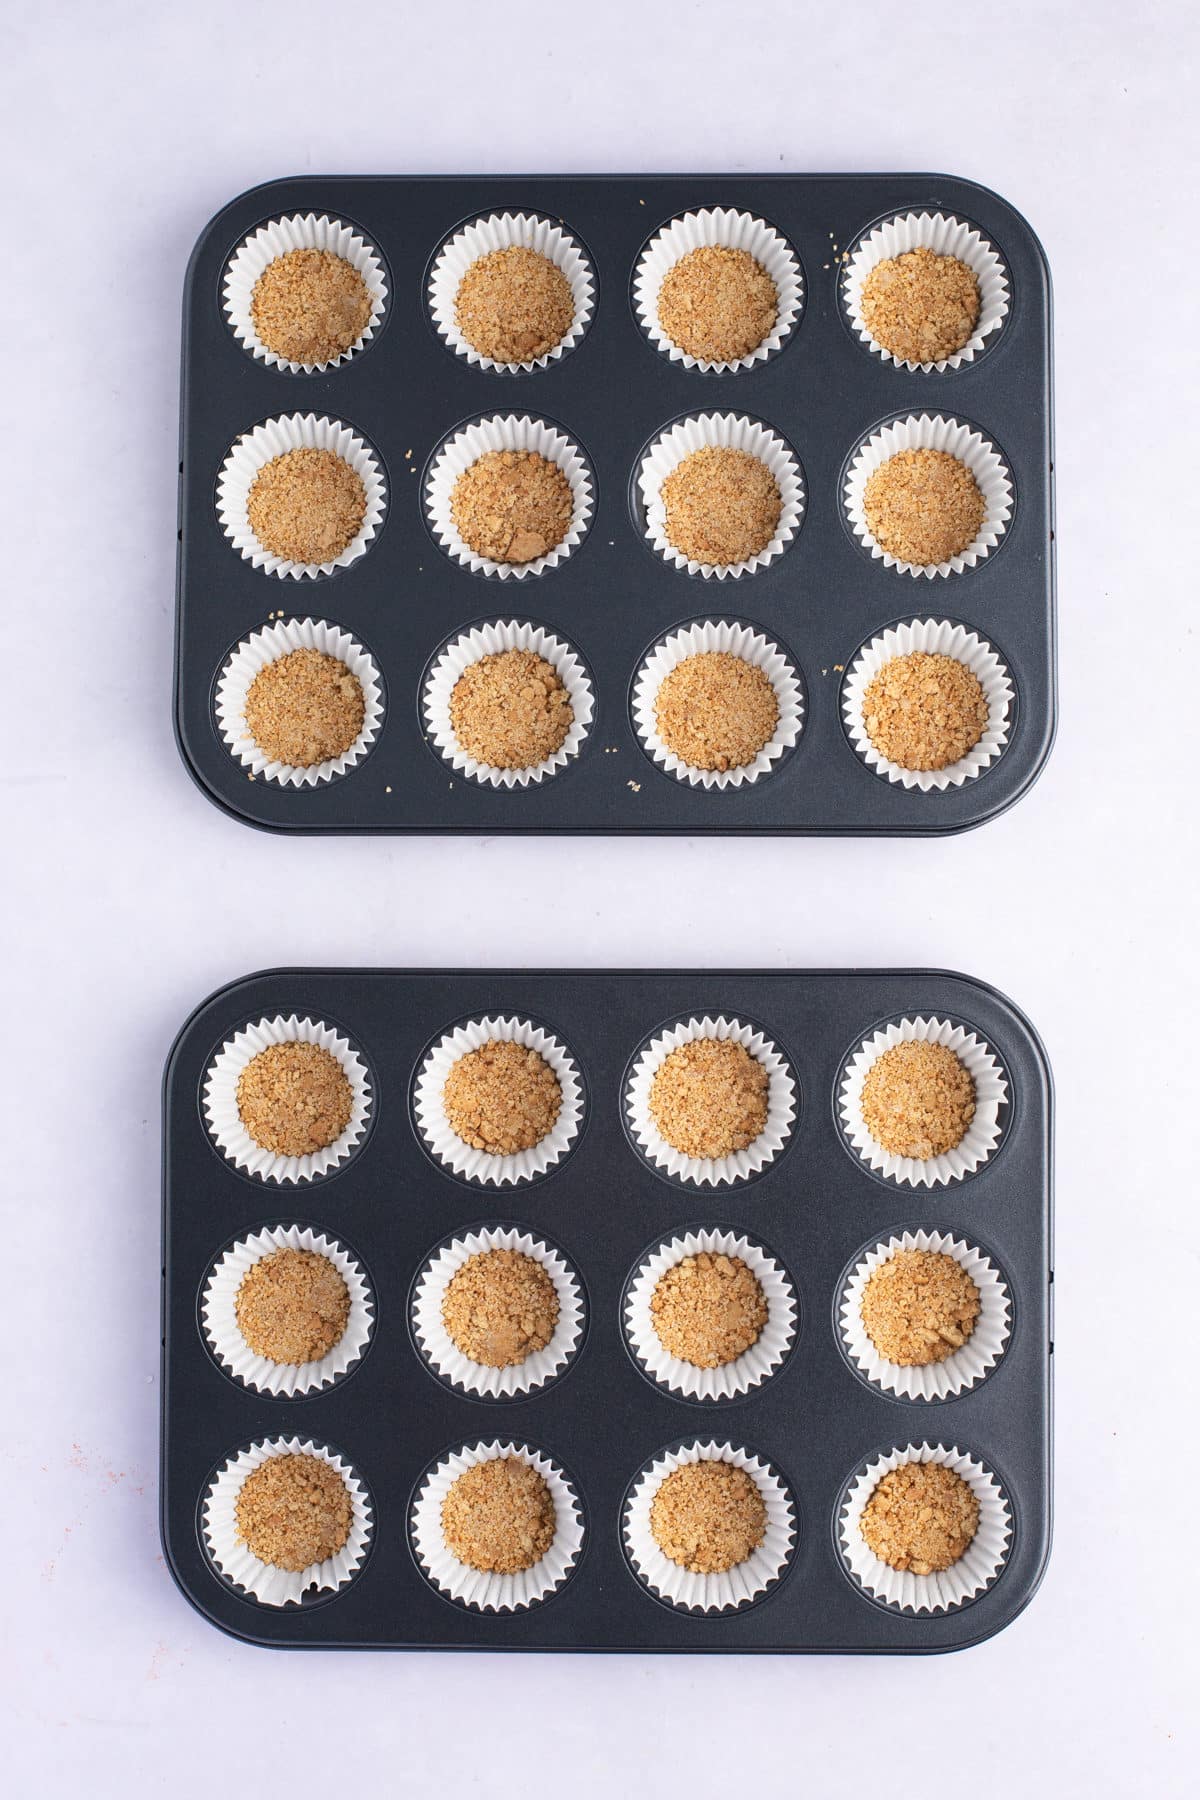 graham cracker crust mixture pressed into two mini muffin tins